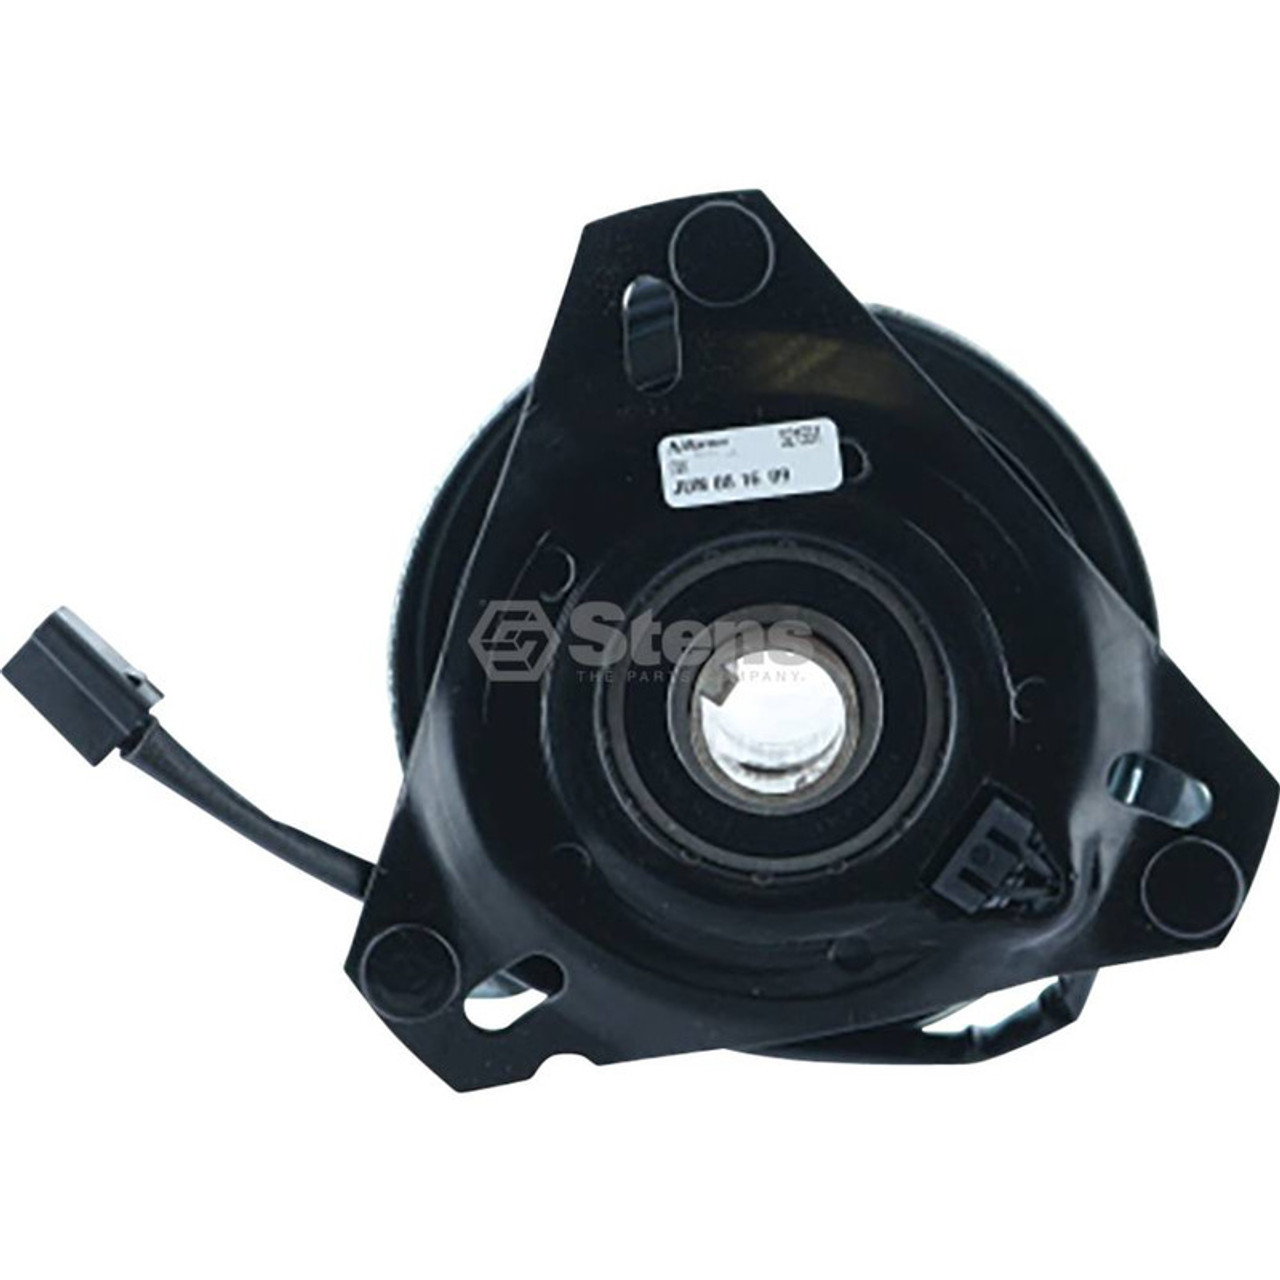 Electric PTO Clutch for Poulan 108218X, 137140, 142600, 532108218, 532142600, 917532108218, 917532142600